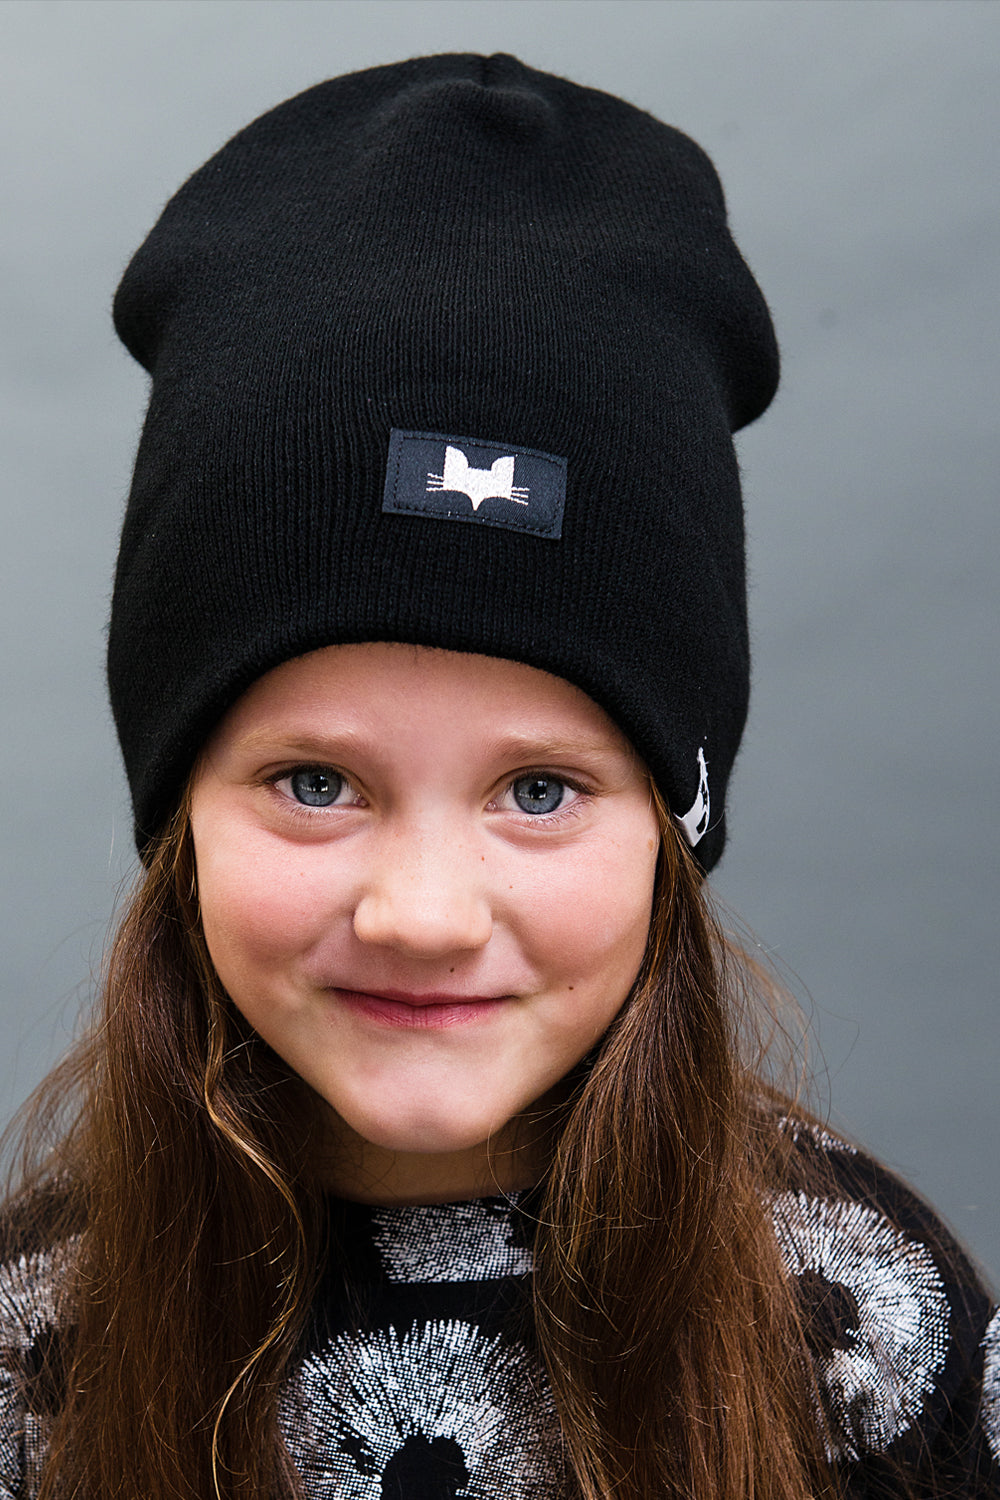 Unisex foxy beanie. Metallic silver logo badge, made and designed in the uk.